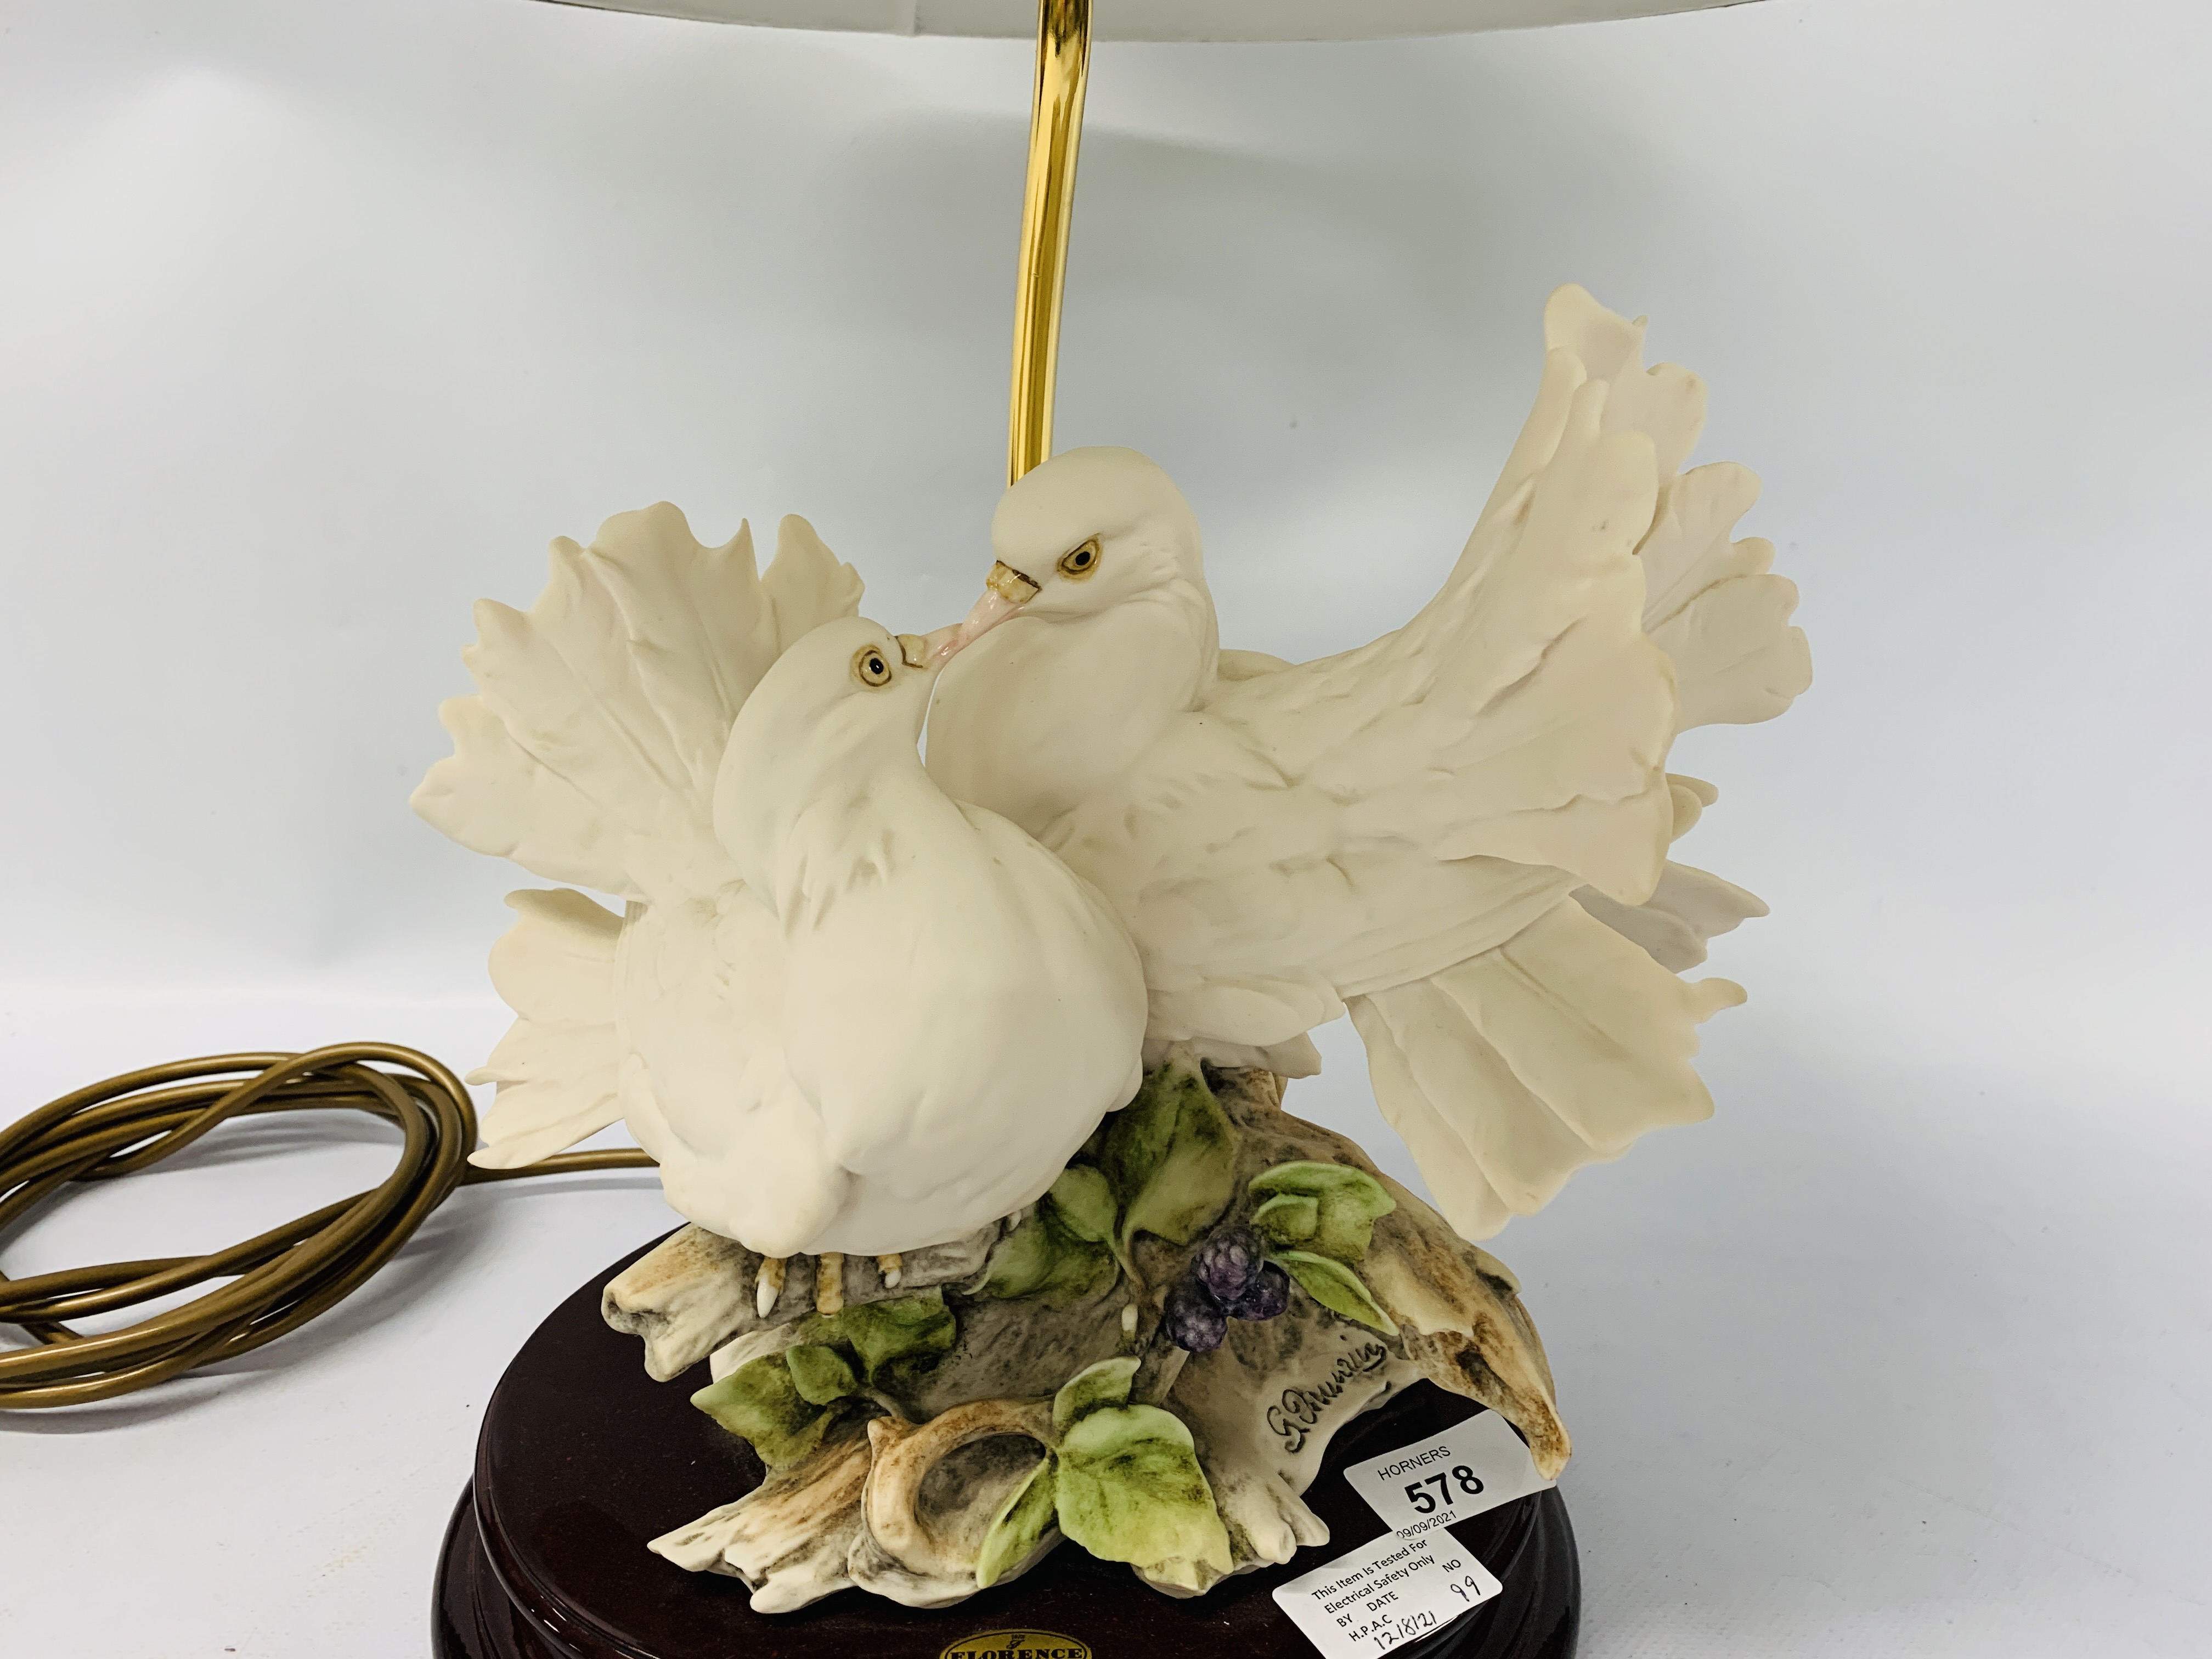 A FLORENCE TABLE LAMP IN THE FORM OF DOVES - SOLD AS SEEN - Image 2 of 5